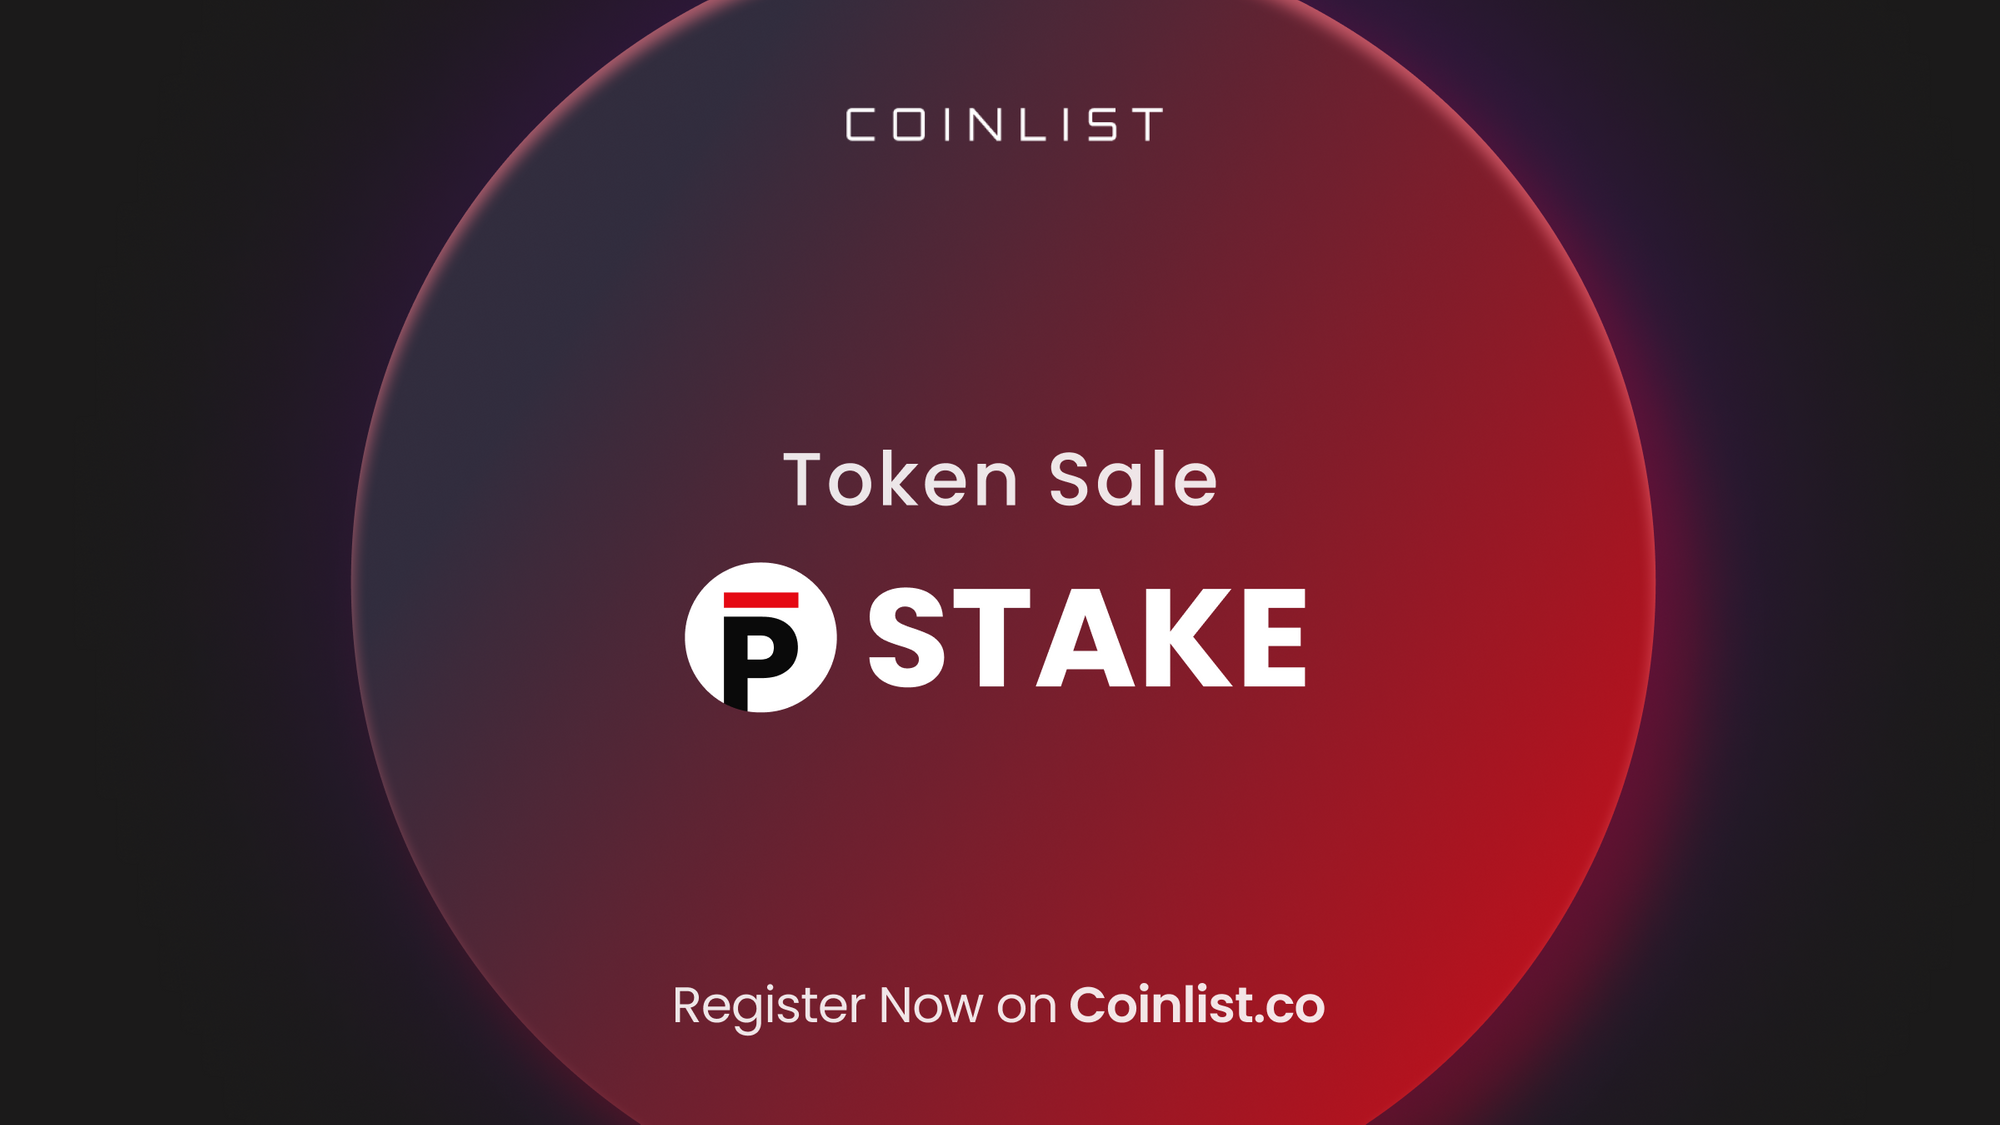 Announcing the pSTAKE Token Sale on CoinList